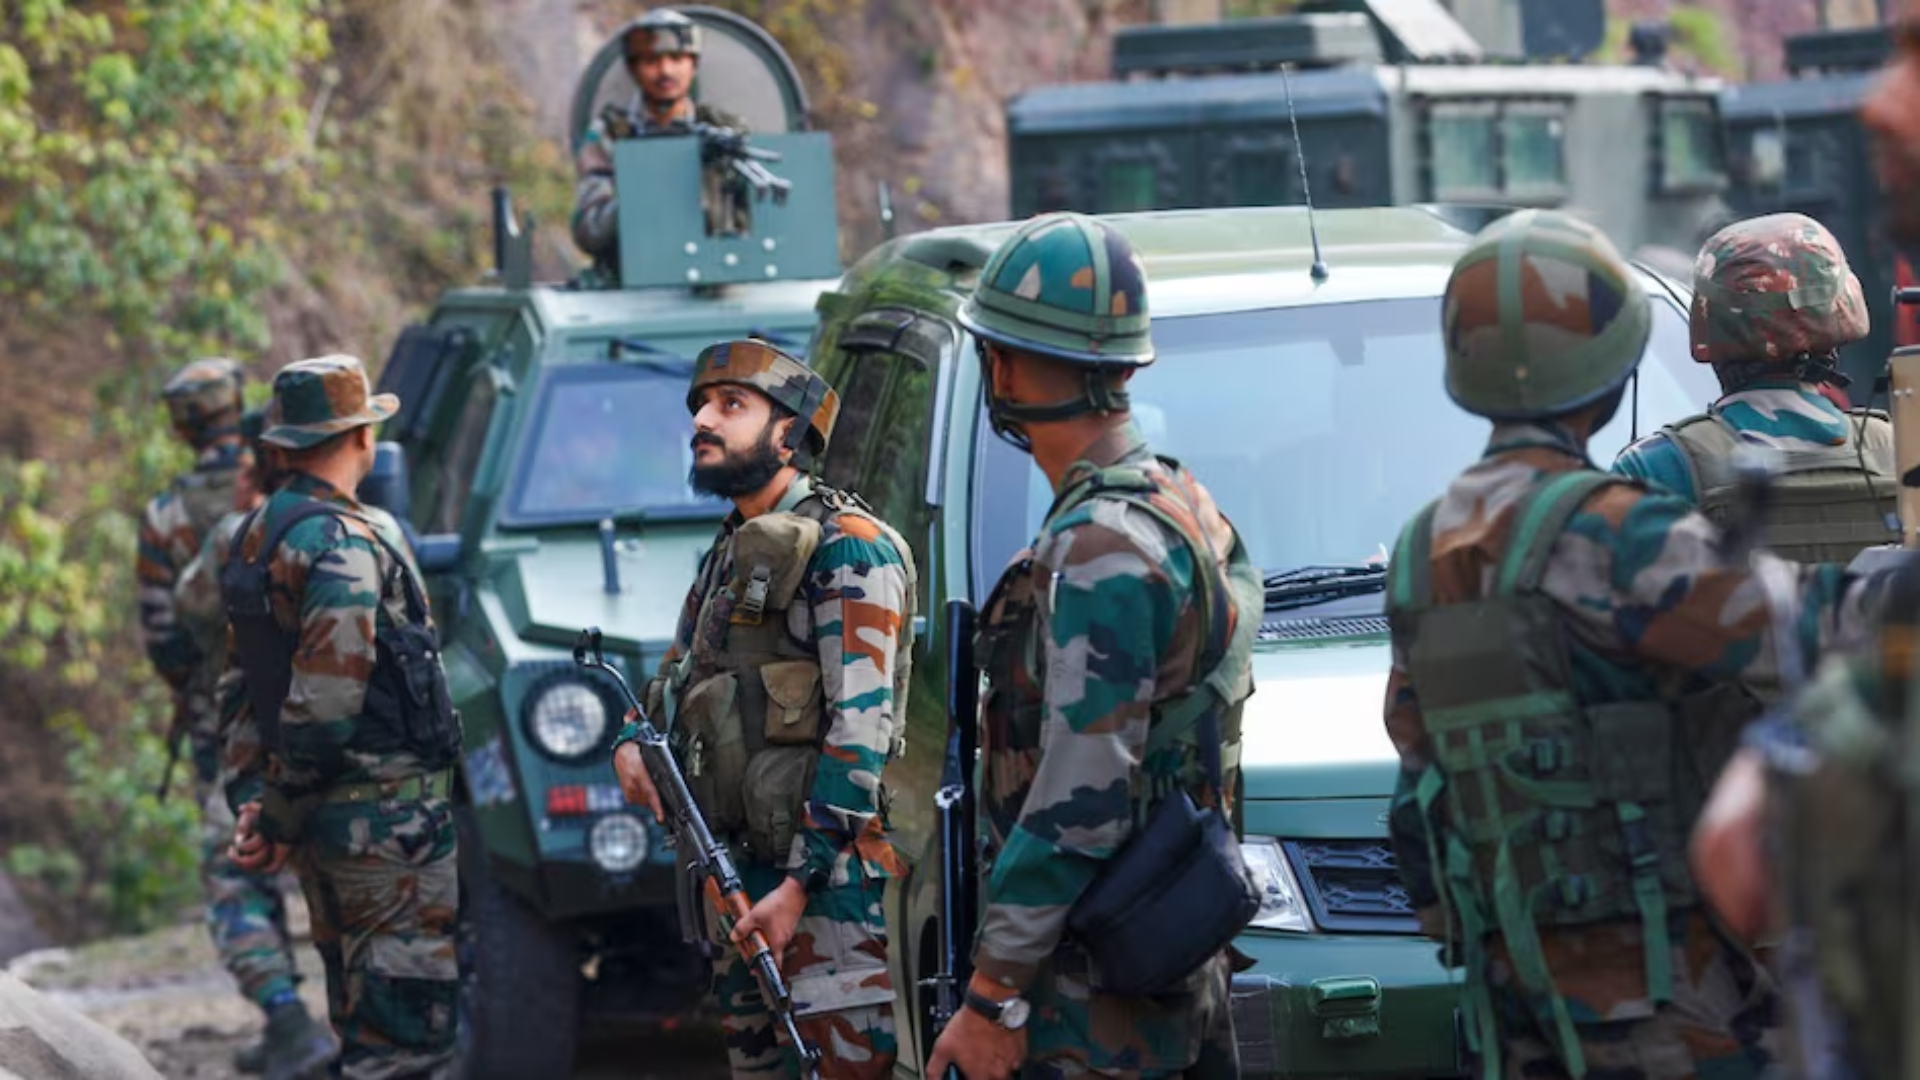 J&K: 4 Terrorists and 2 Military Personnel Were Killed In Separate Operations In Kulgam